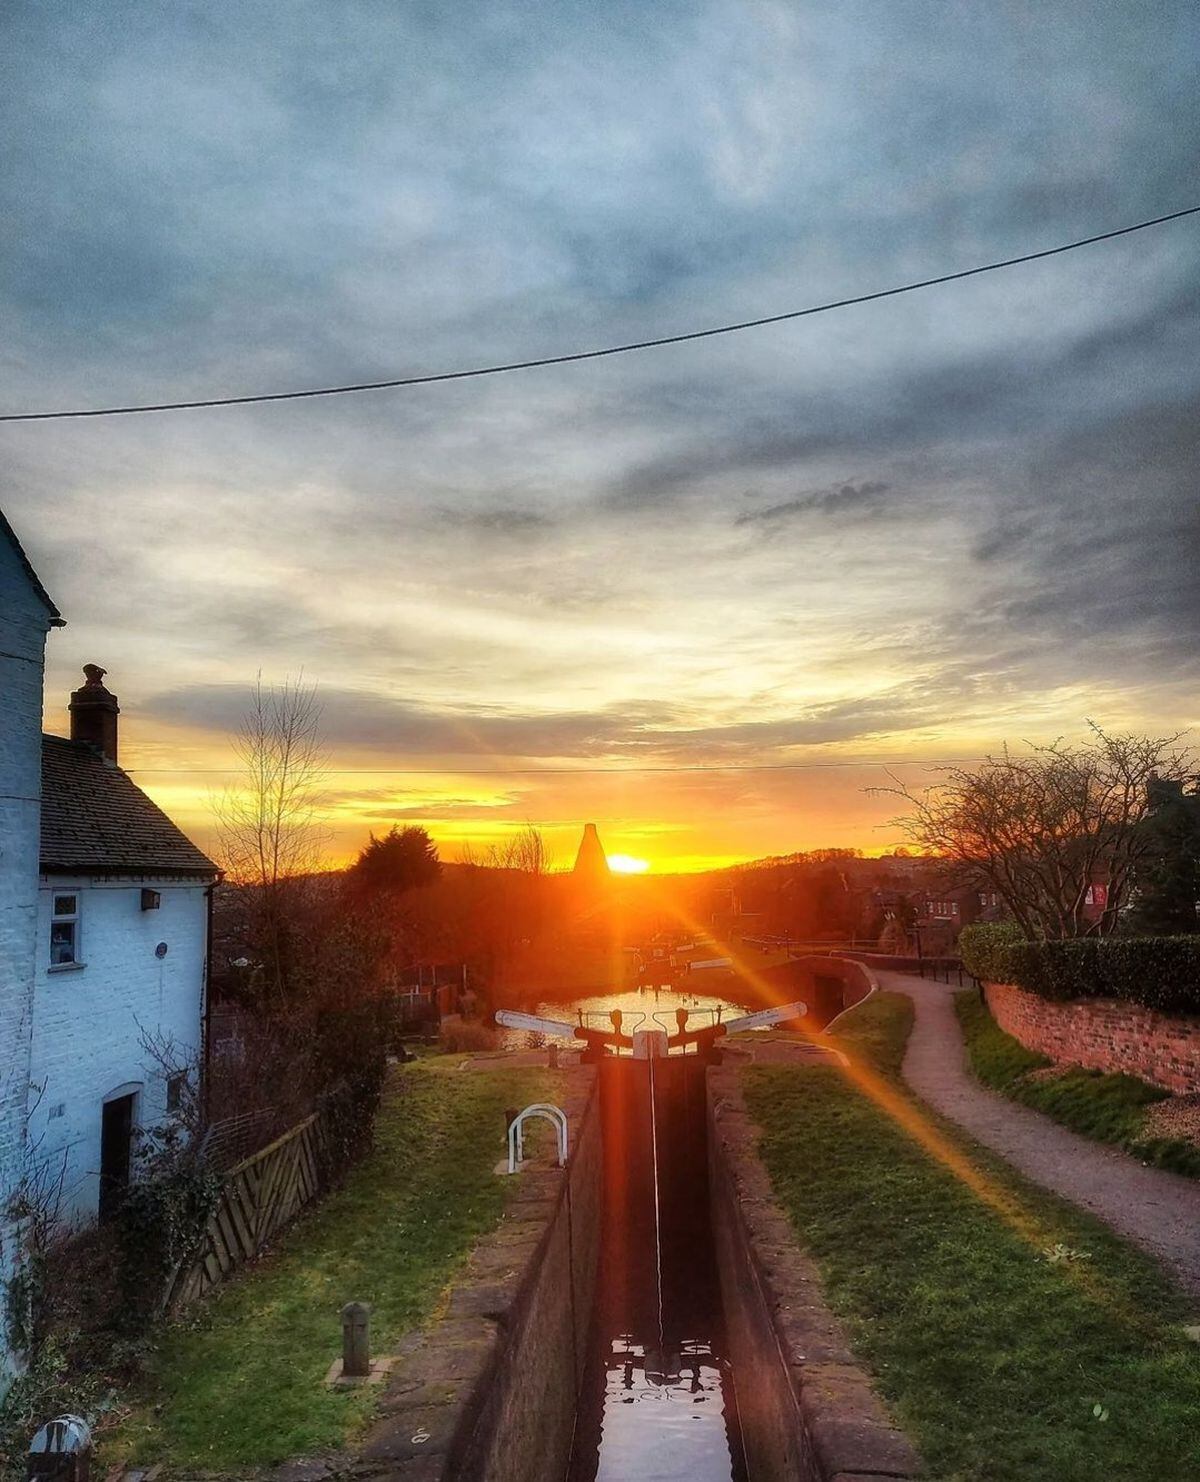 Sunset over canals in Wordsley, photographed by Sally Shillingford